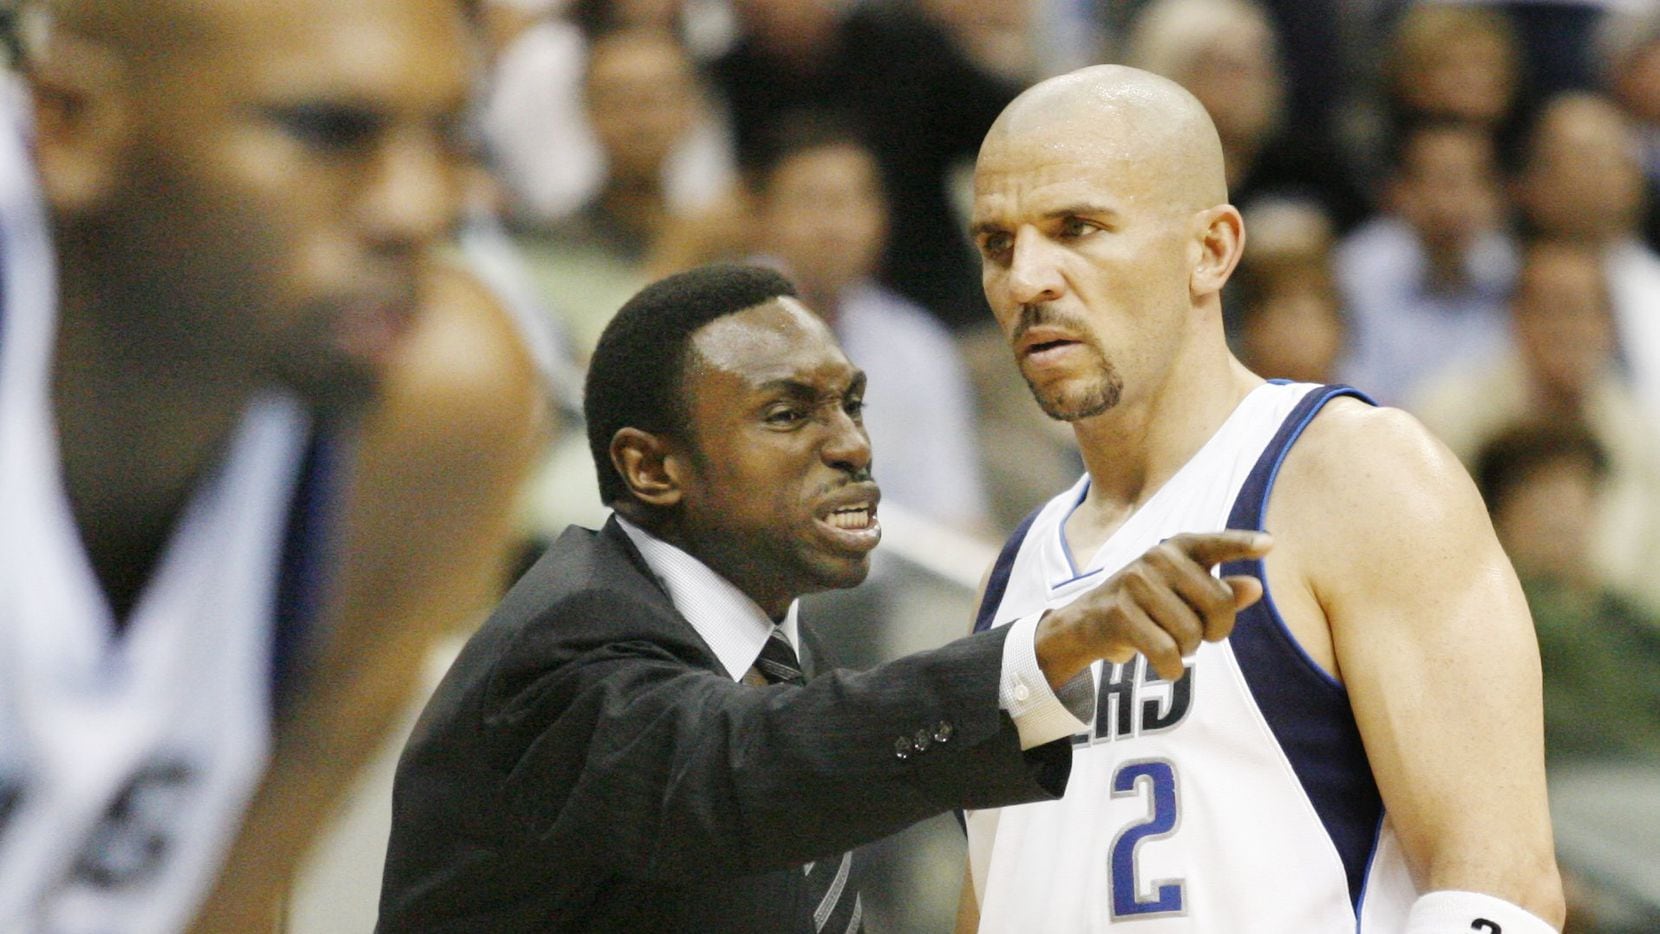 Dallas head coach Avery Johnson makes a point to Jason Kidd in the fourth quarter of the Lakers' 102-100 win over Dallas on Dec. 26, 2008.